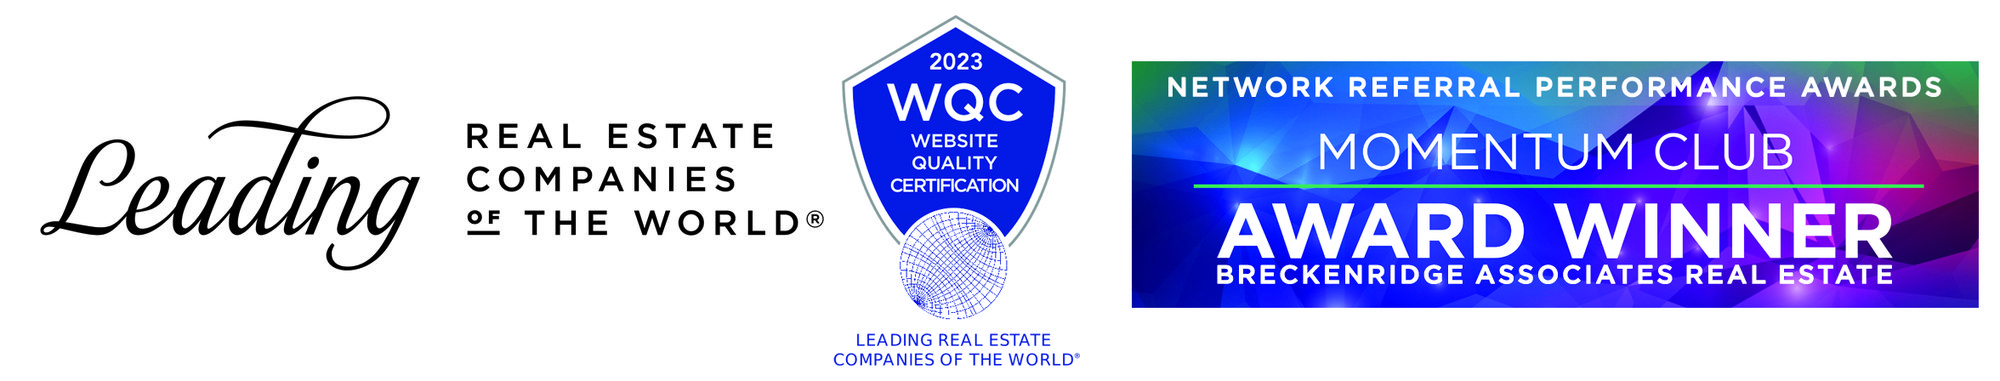 Leading Real Estate Companies of the World Logos and Awards for Breckenridge Associates Real Estate in Breckenridge, CO